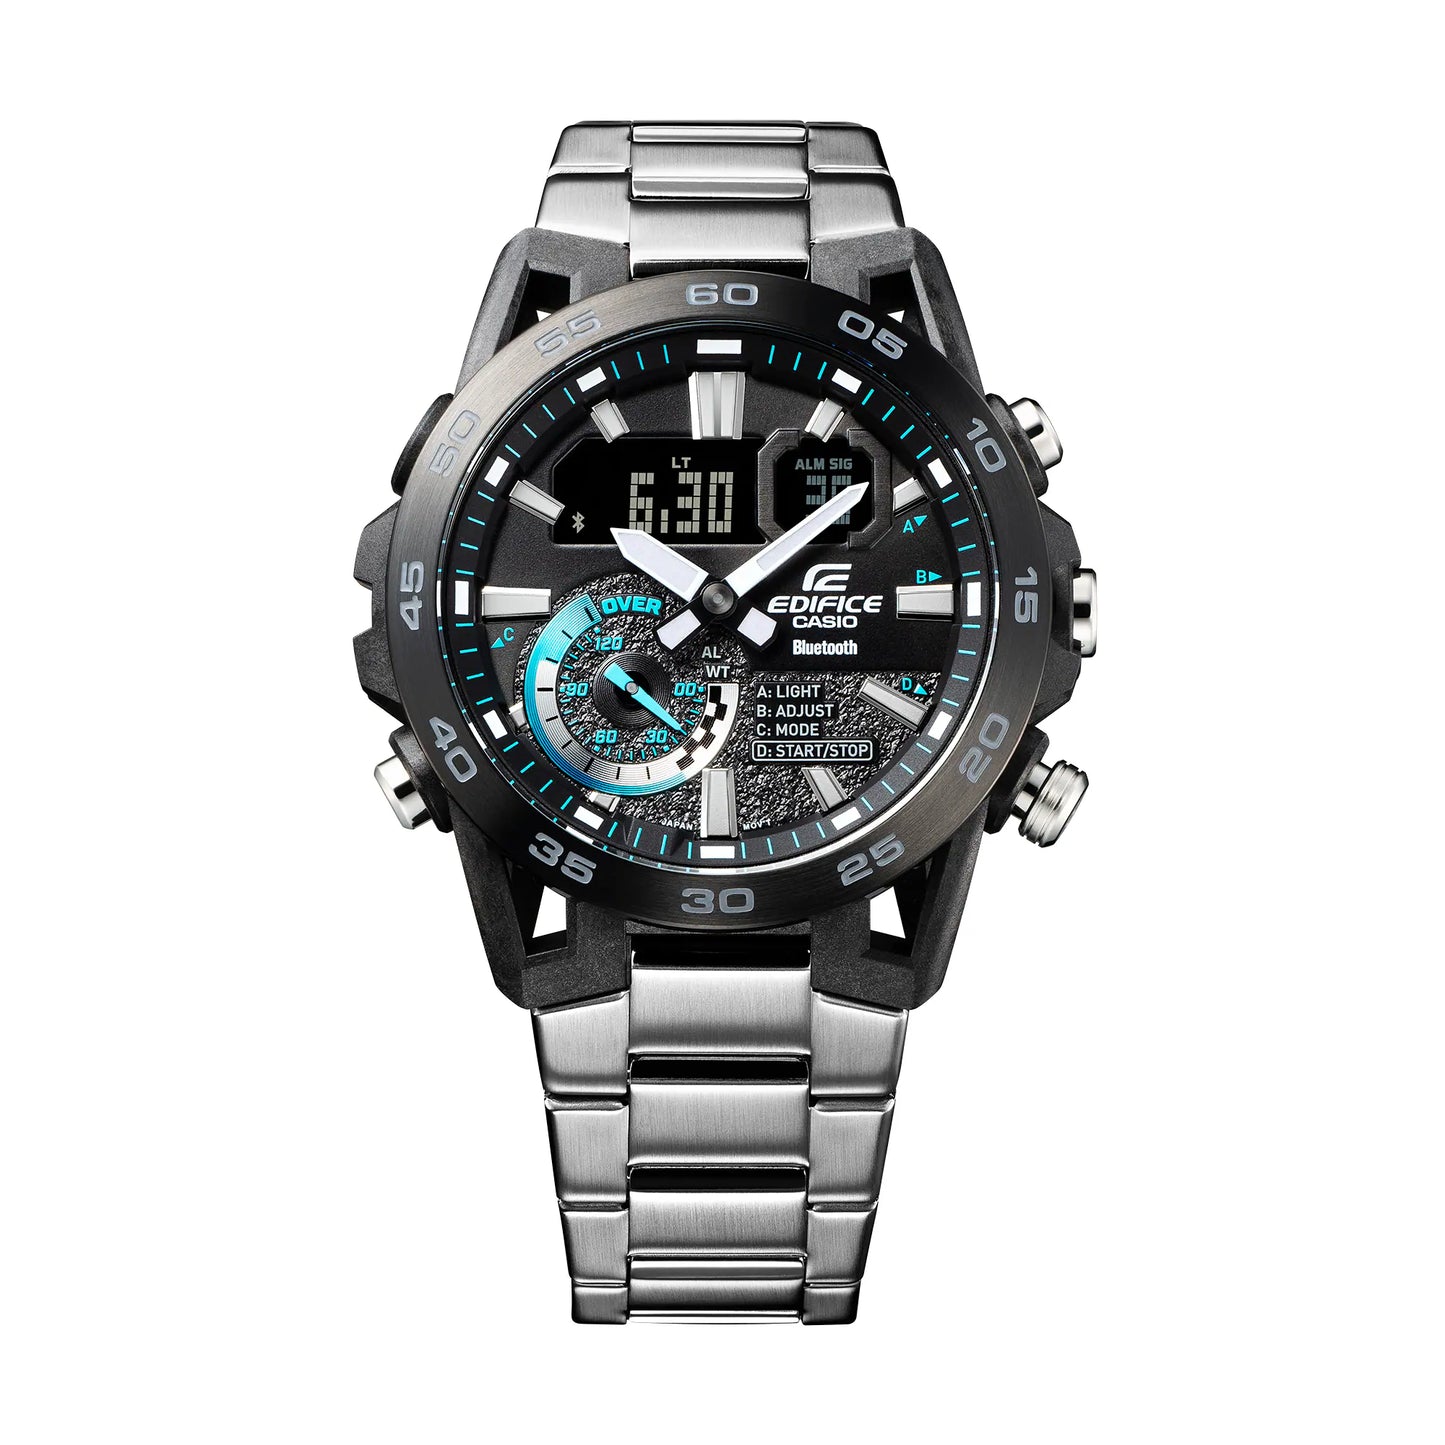 EDIFICE SOSPENSIONE ECB-40, with carbon fiber reinforced resin suspension arm design and Smartphone Link.